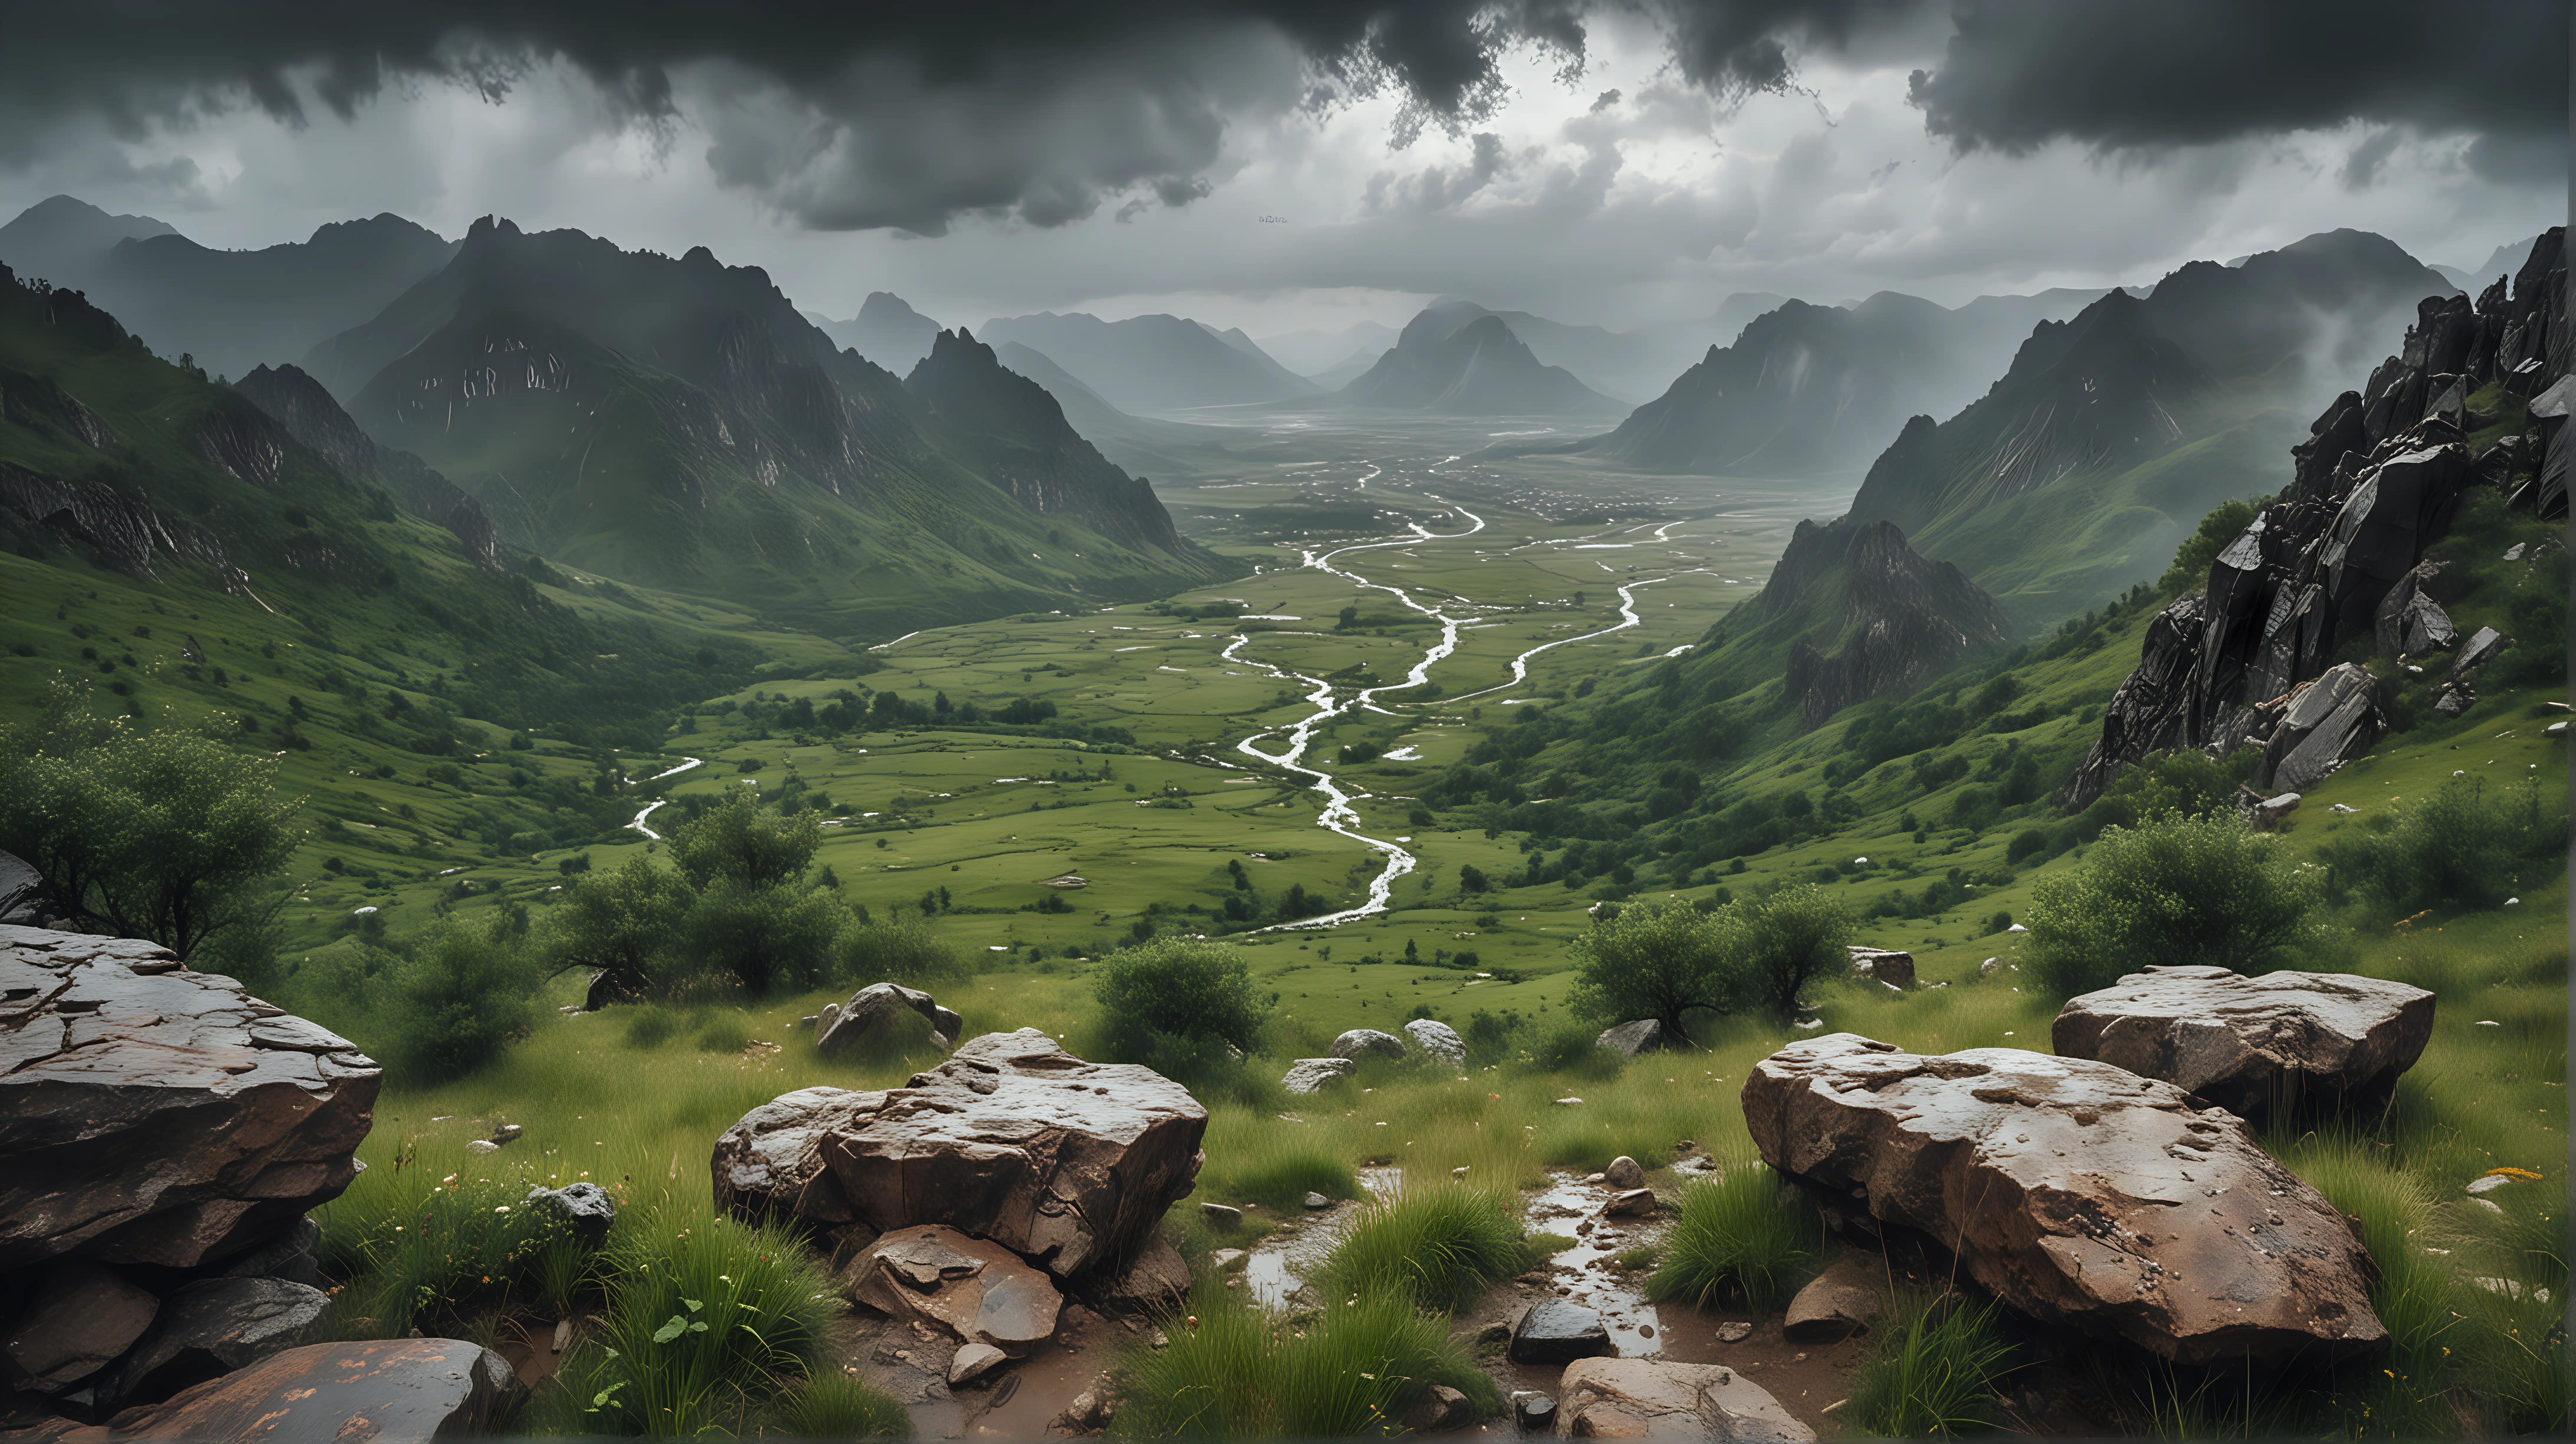 the view of a valley between two mountain ranges, grass, trees, bushes, strange stones, hard rain, cloudy, distant view from a high mount